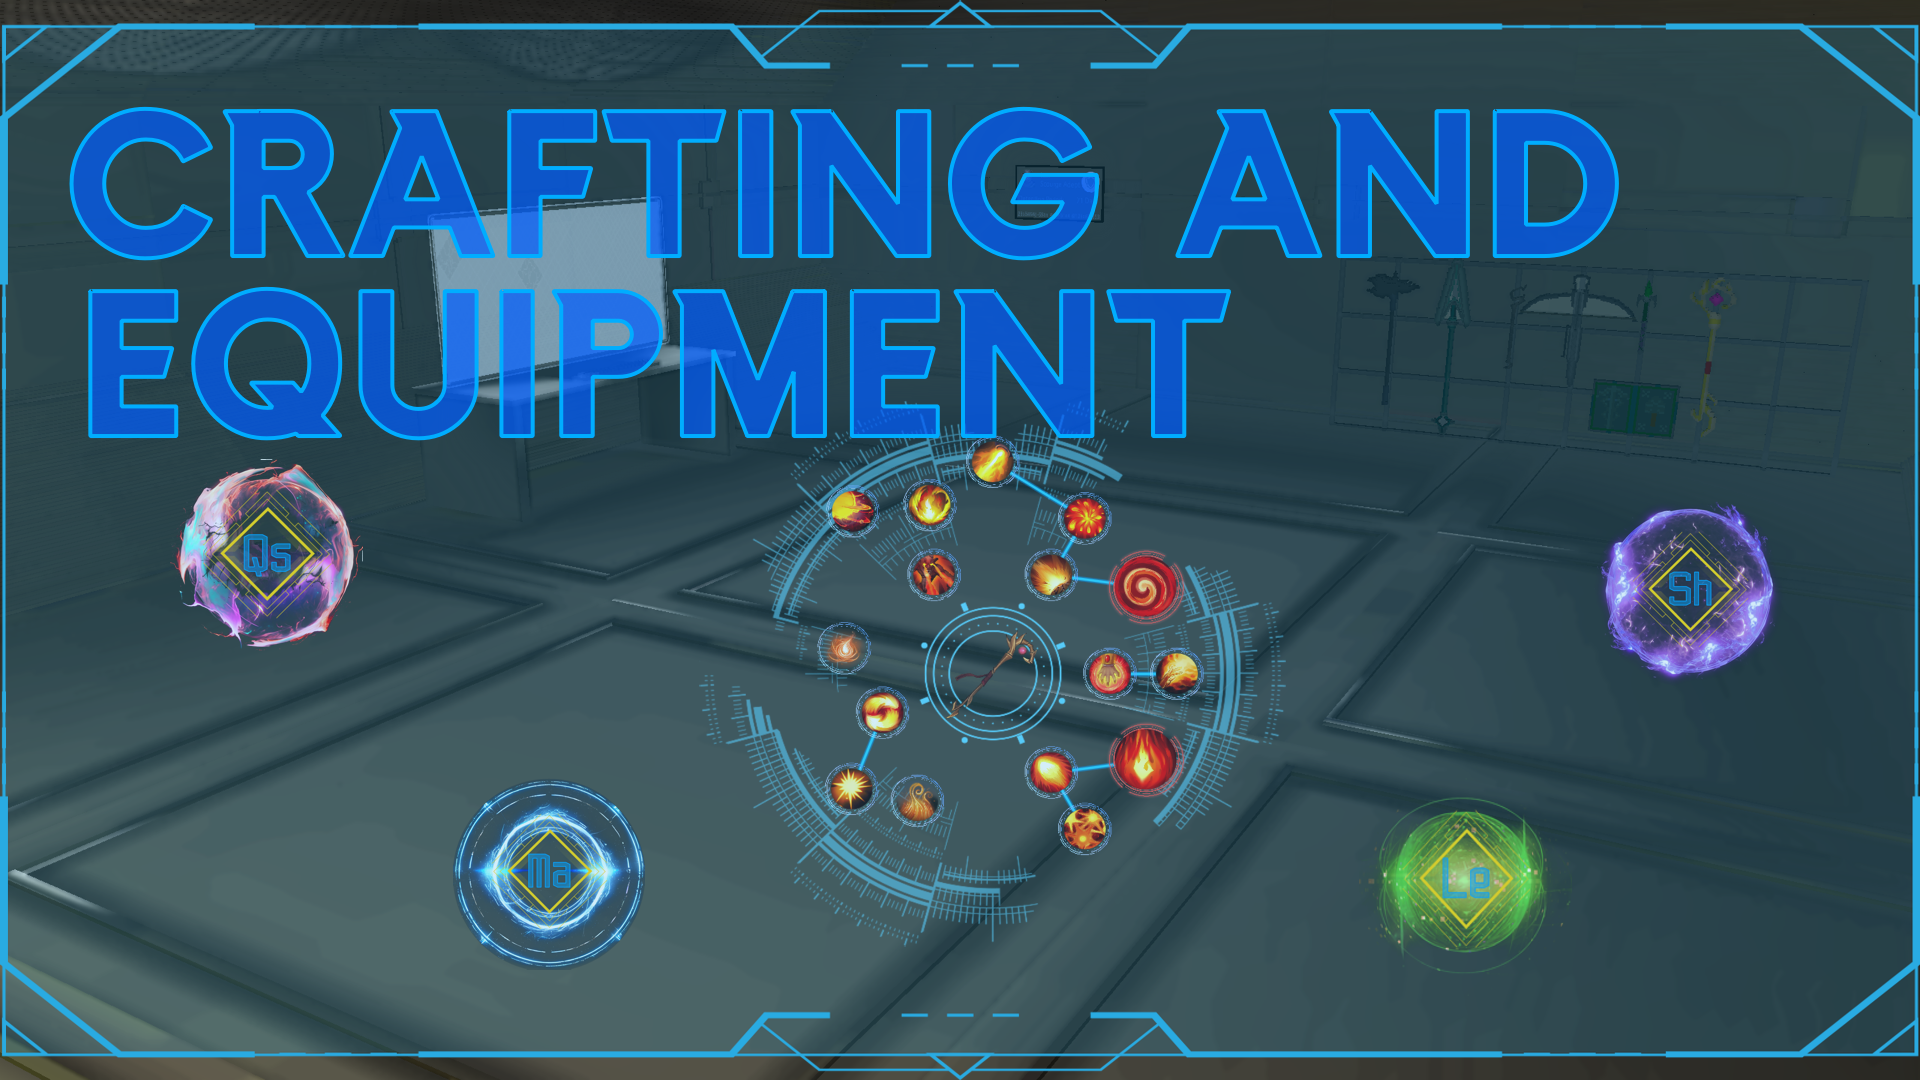 Crafting and Equipment Teaser